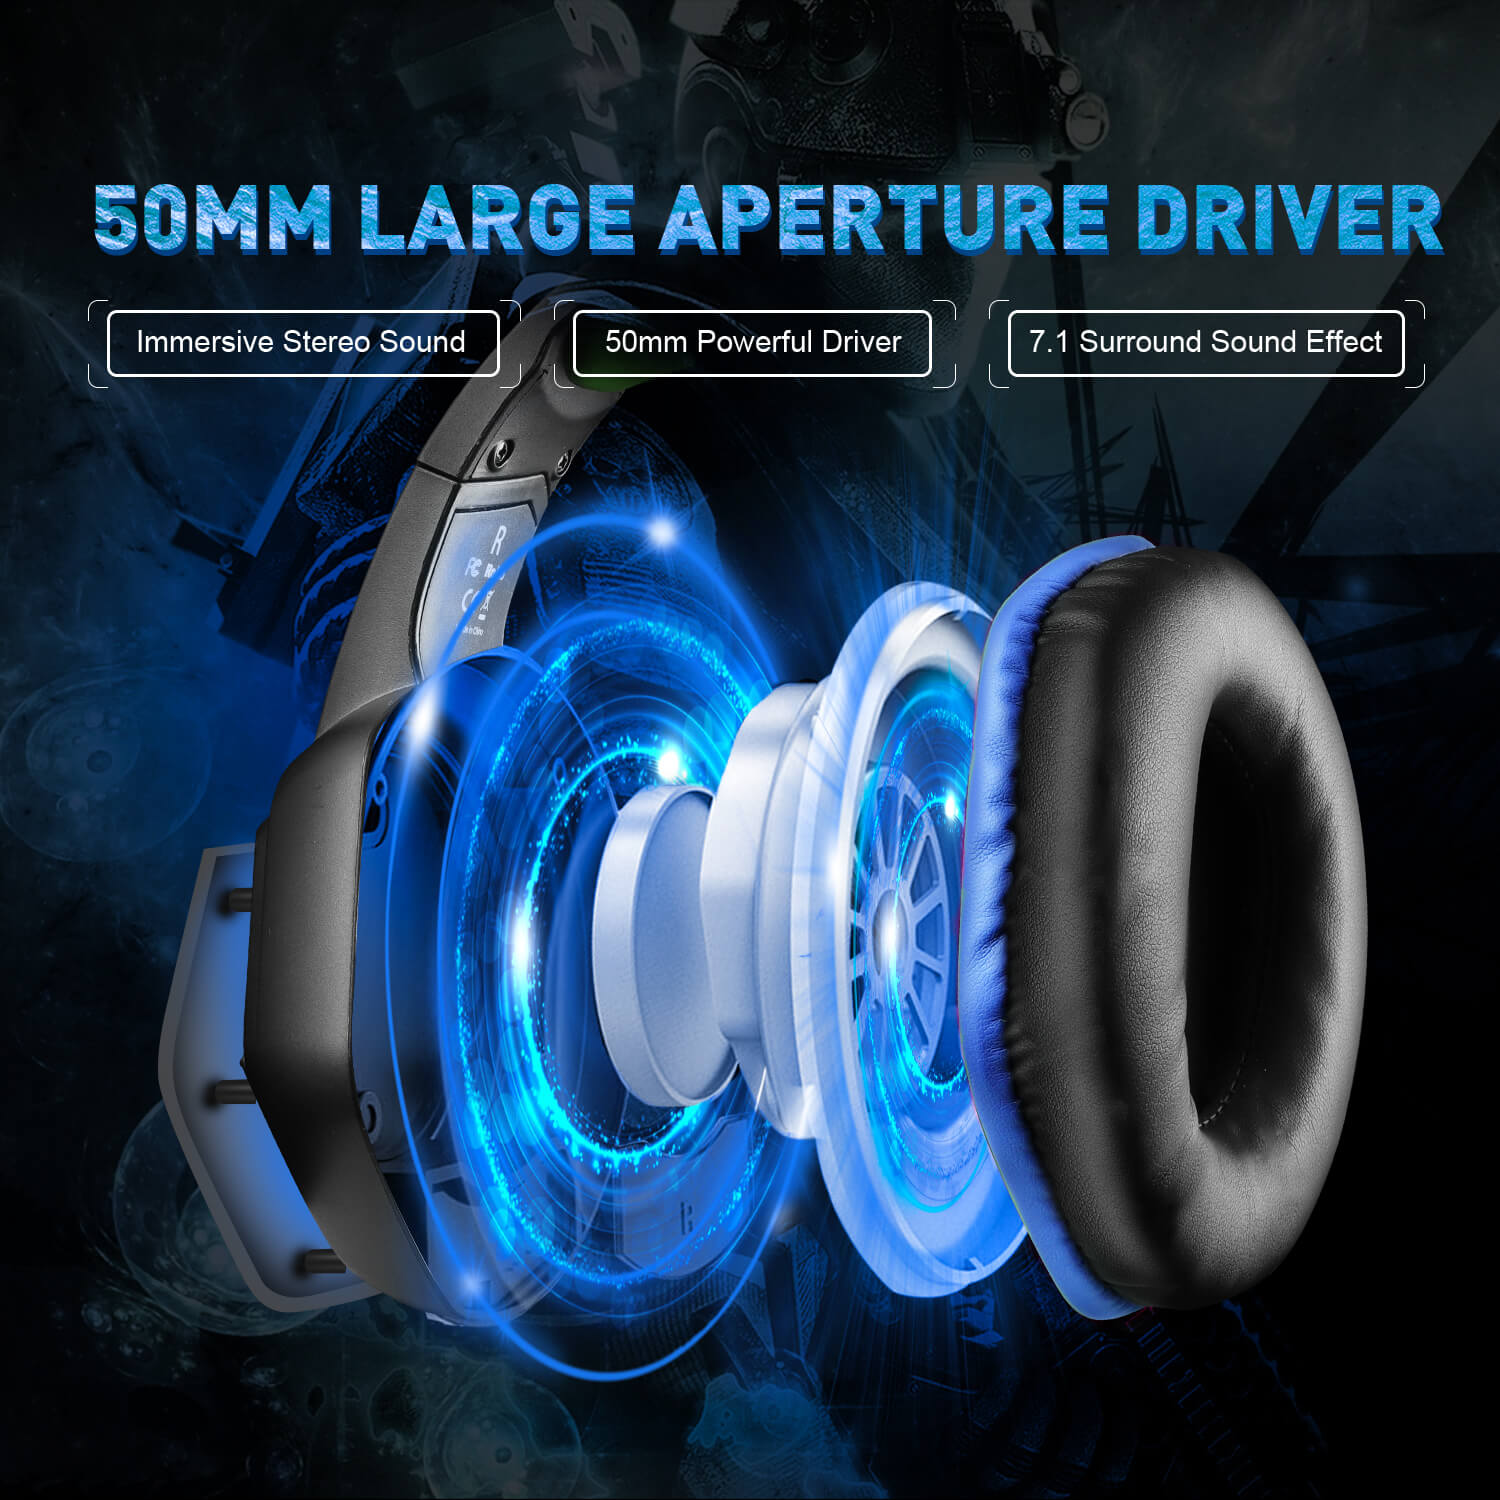 EKSA Gaming Headset PC Headset with 7.1 Surround Sound, Noise Canceling Over Ear USB Wired Headphones with Microphone